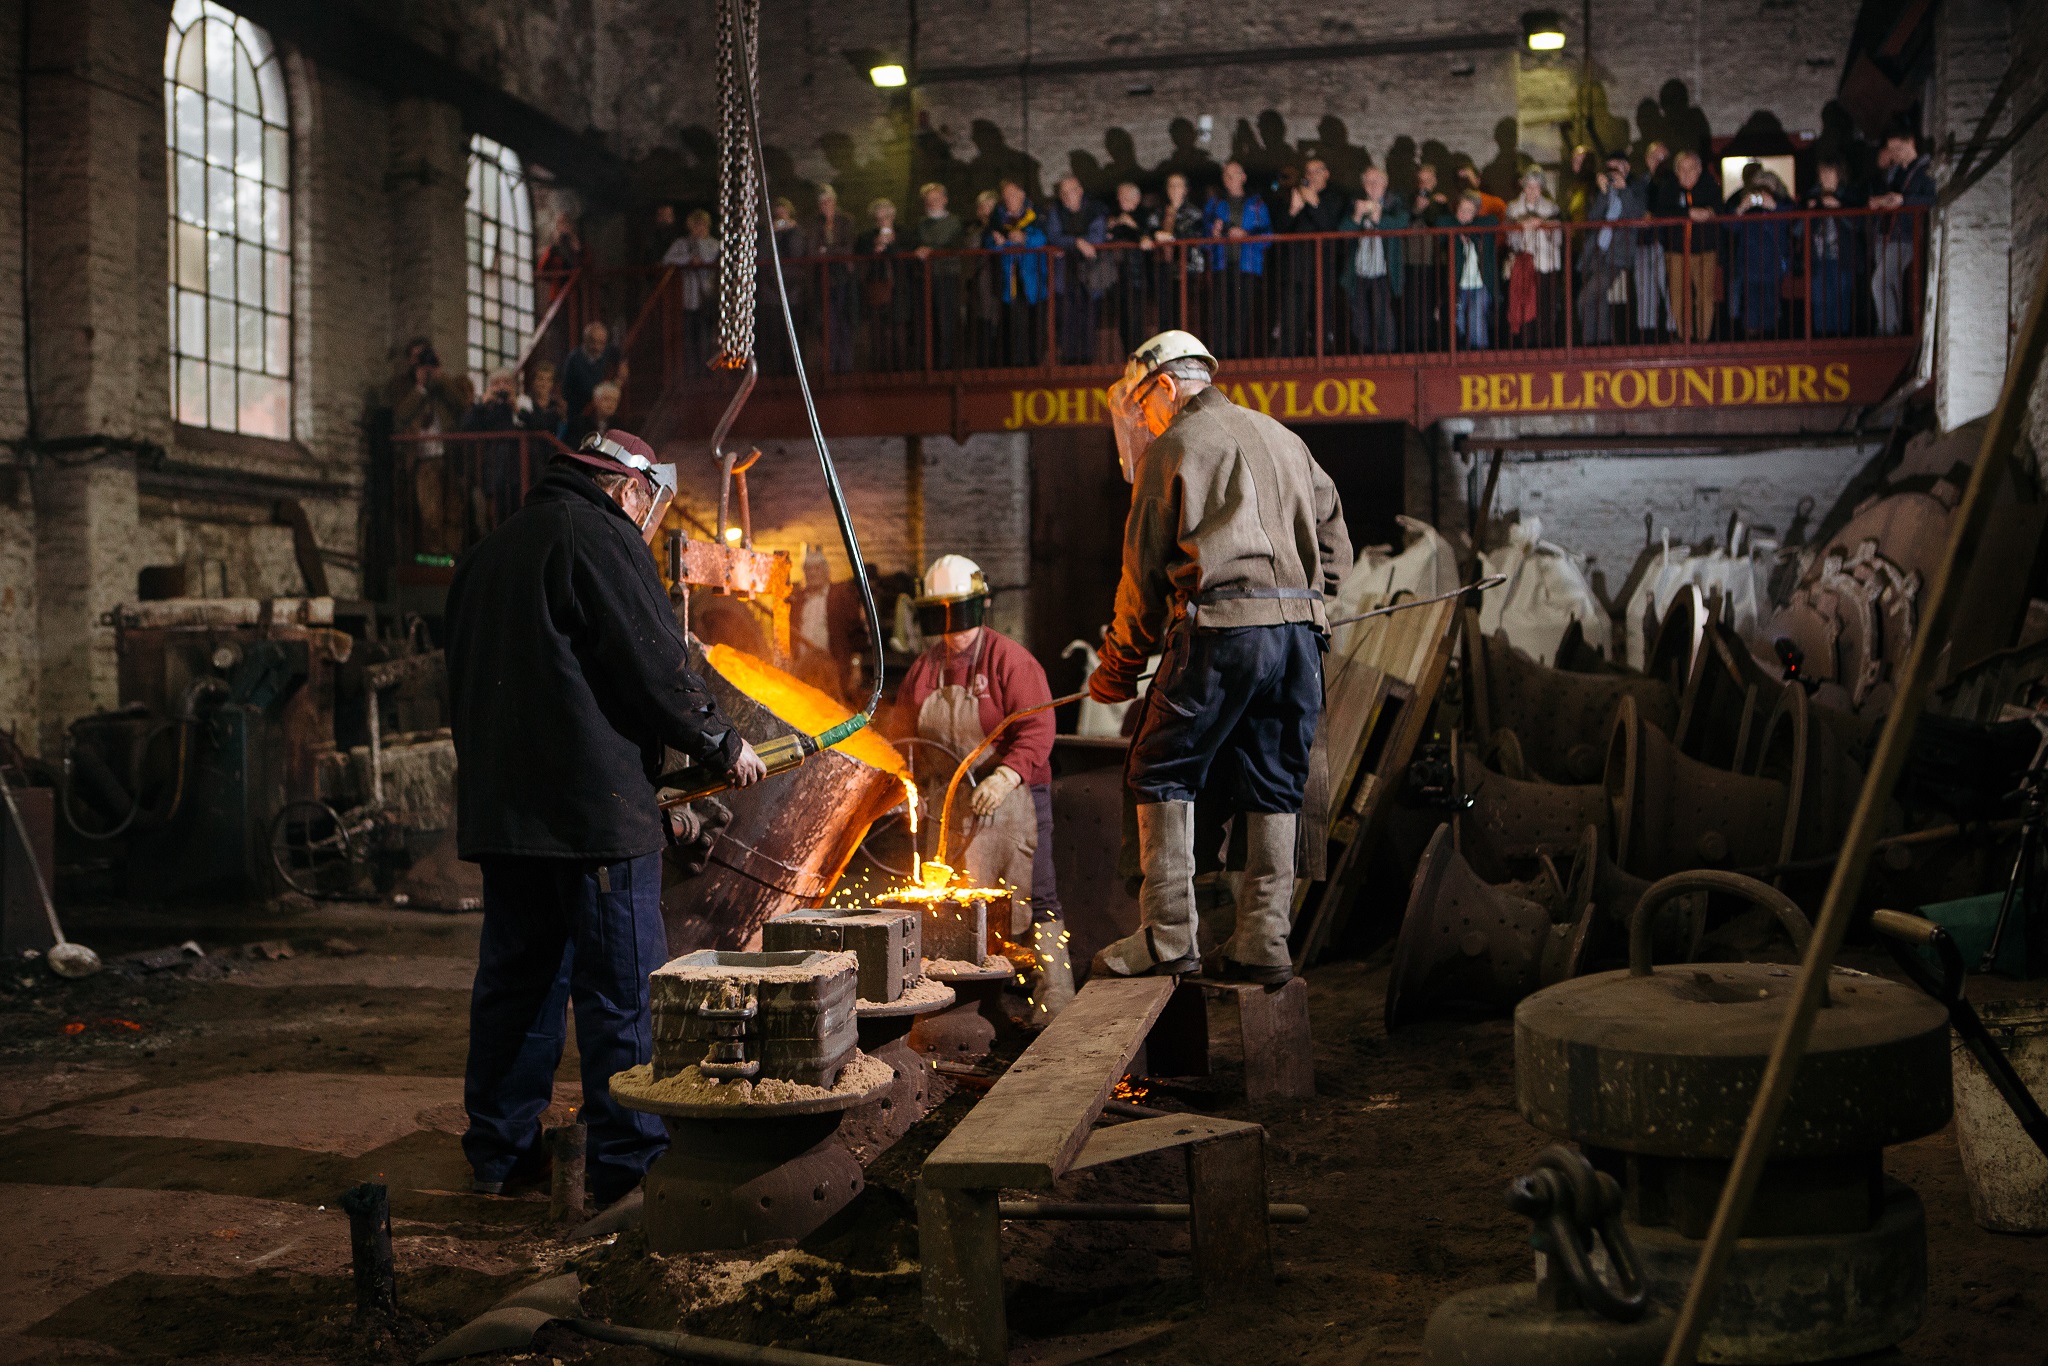 Three men pouring molten metal, demonstrating the bell casting process to a group of onlookers behind.